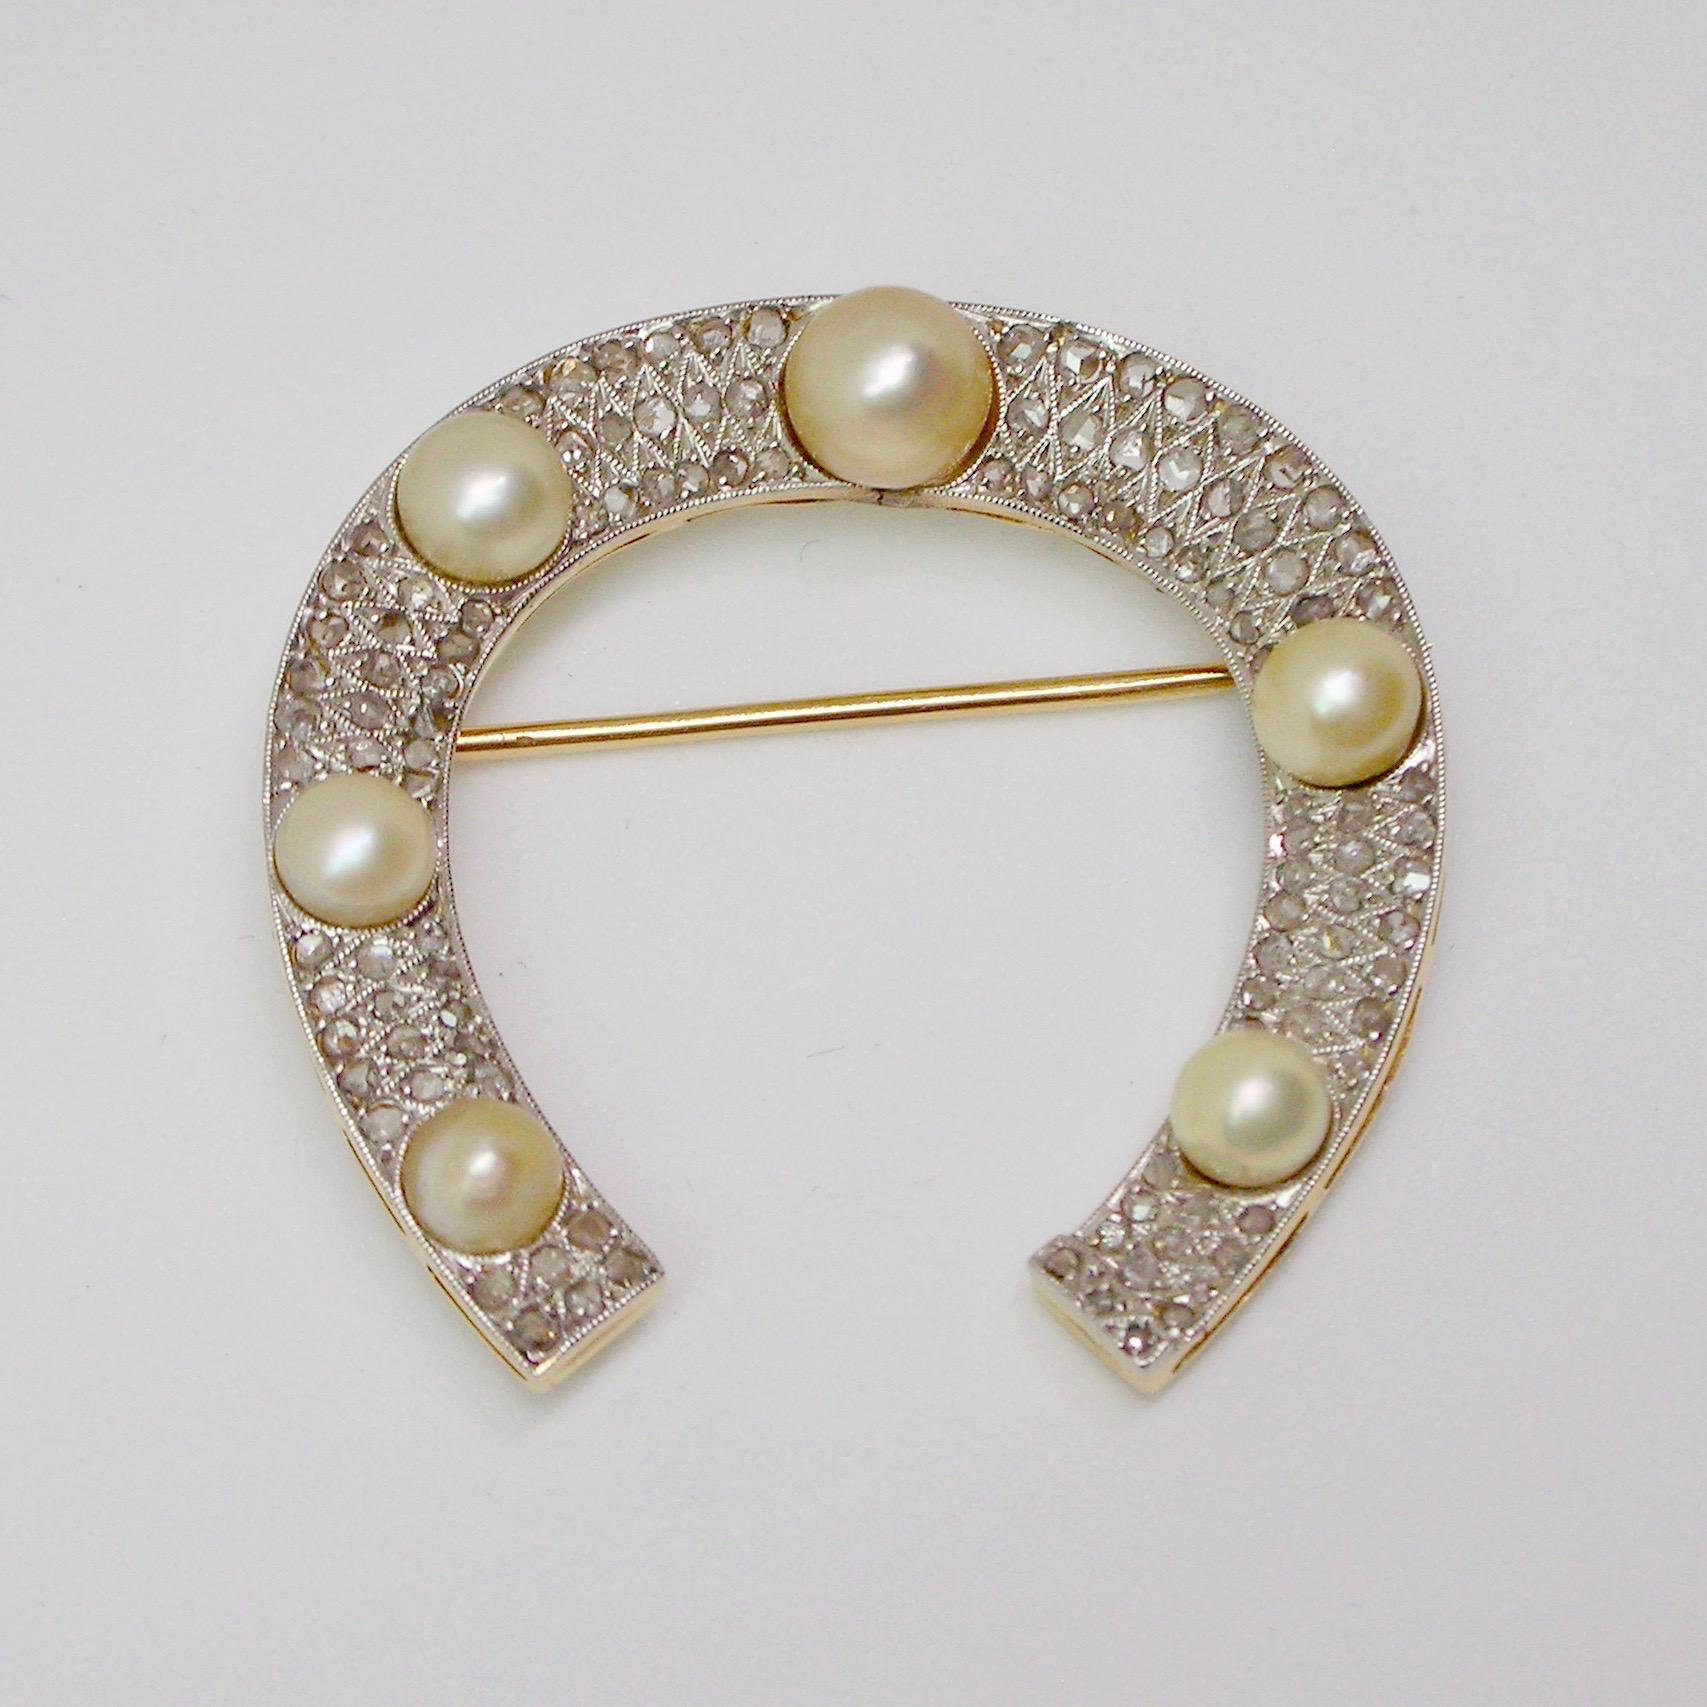 This beautiful horseshoe shaped brooch is set in gold and platinum with rose cut diamonds and cultured pearls. Most likely from the 1920 / 30s.